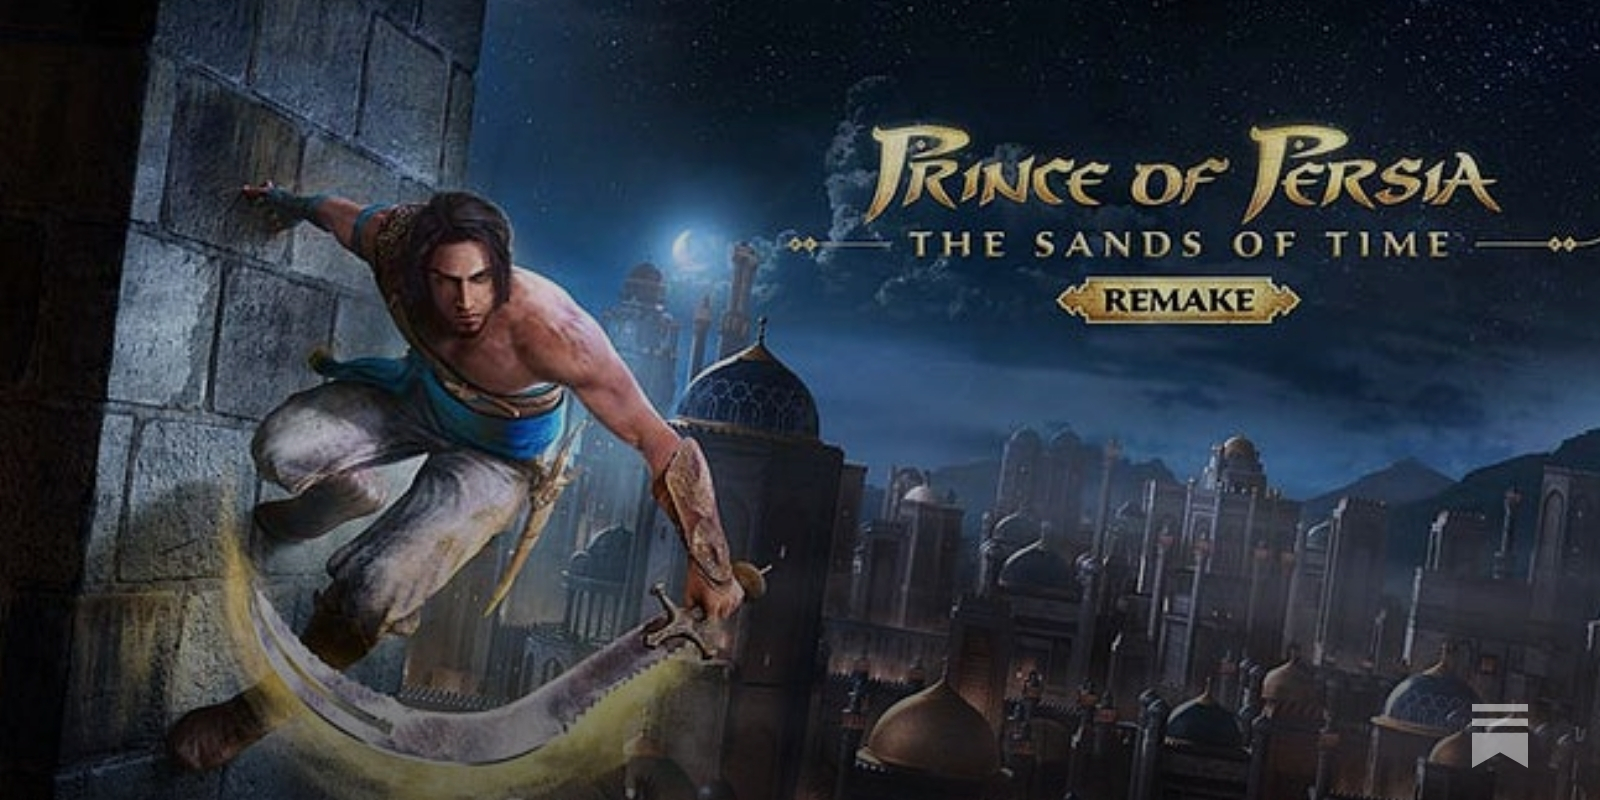 E3 2015: A New Prince of Persia Game on the Cards for Ubisoft? - IBTimes  India